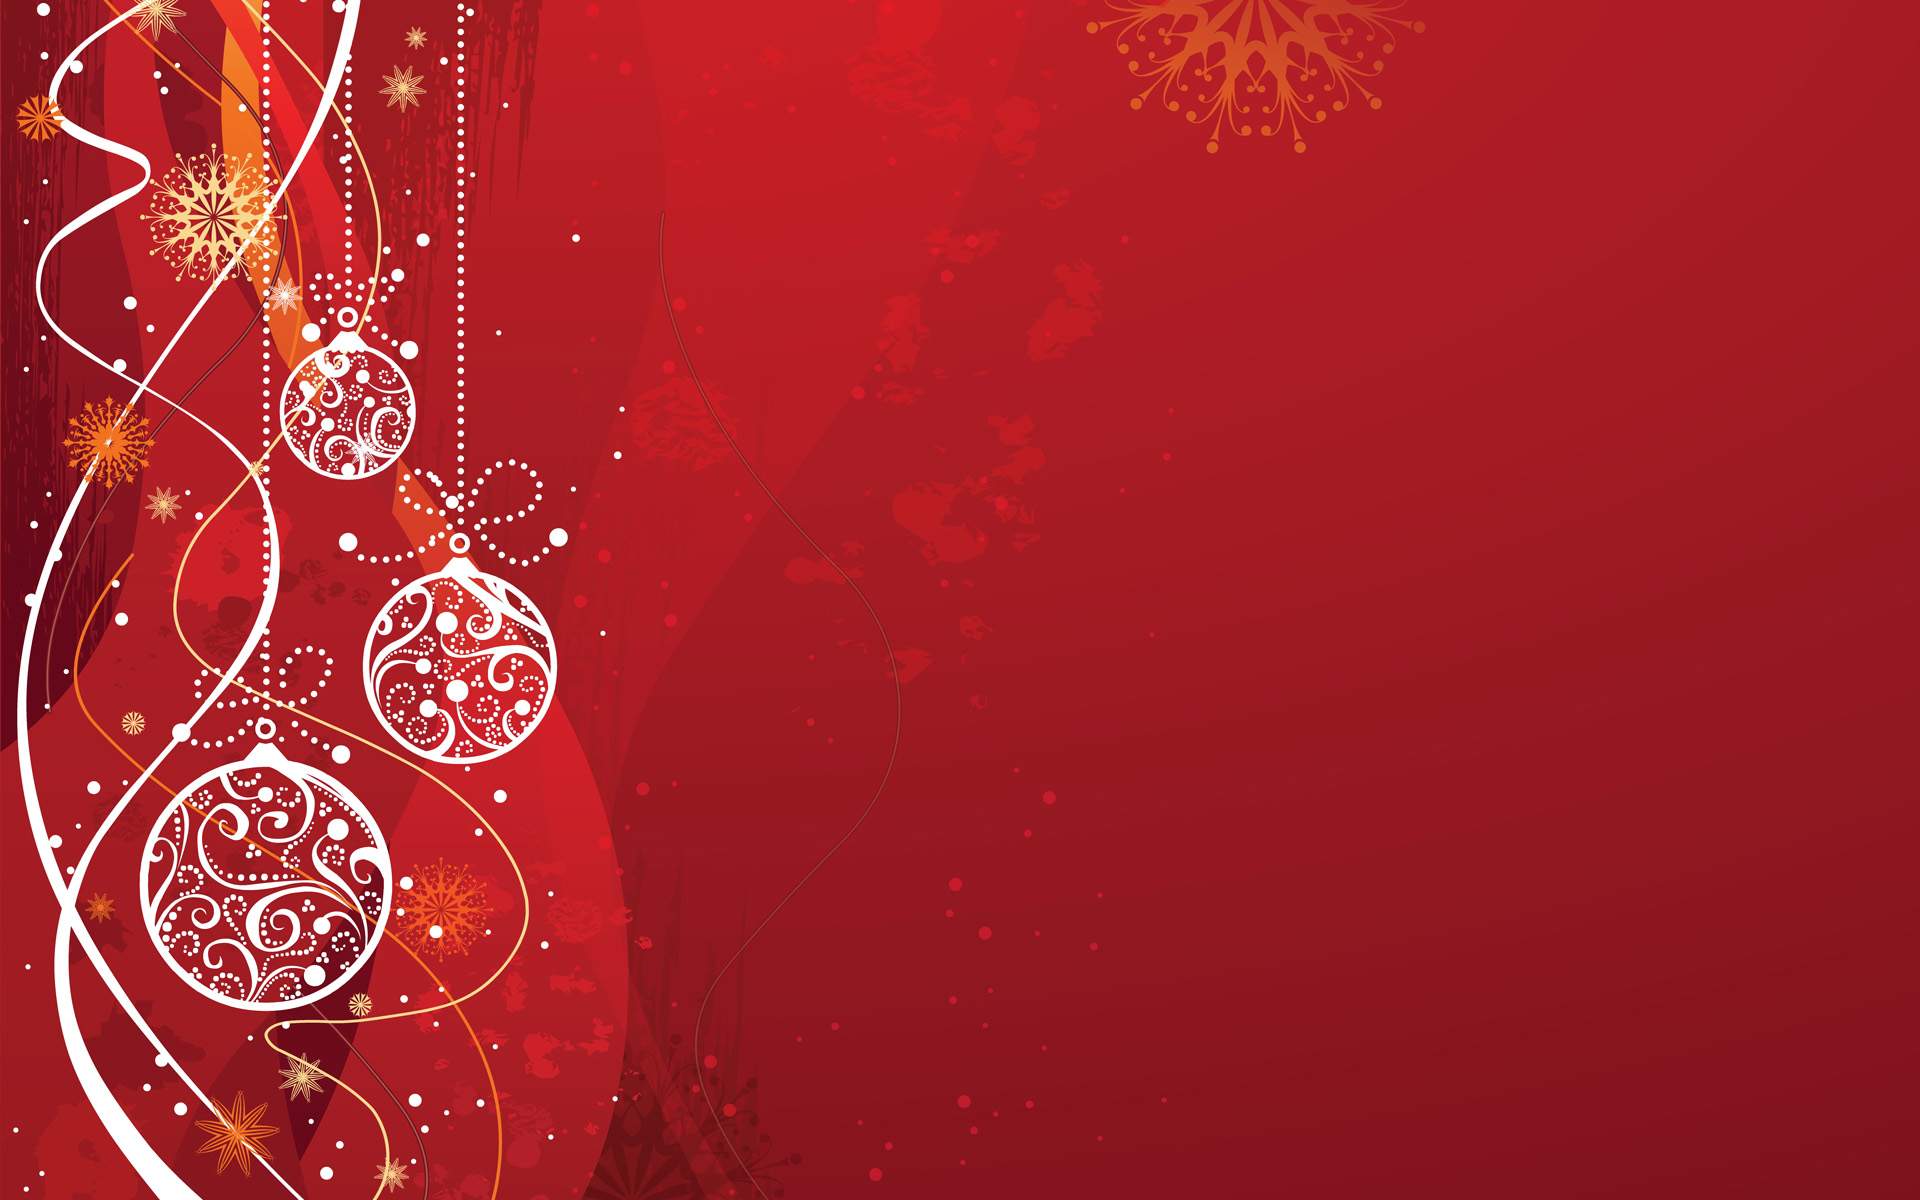 Christmas Backgrounds Walpapers Downloads free with HD